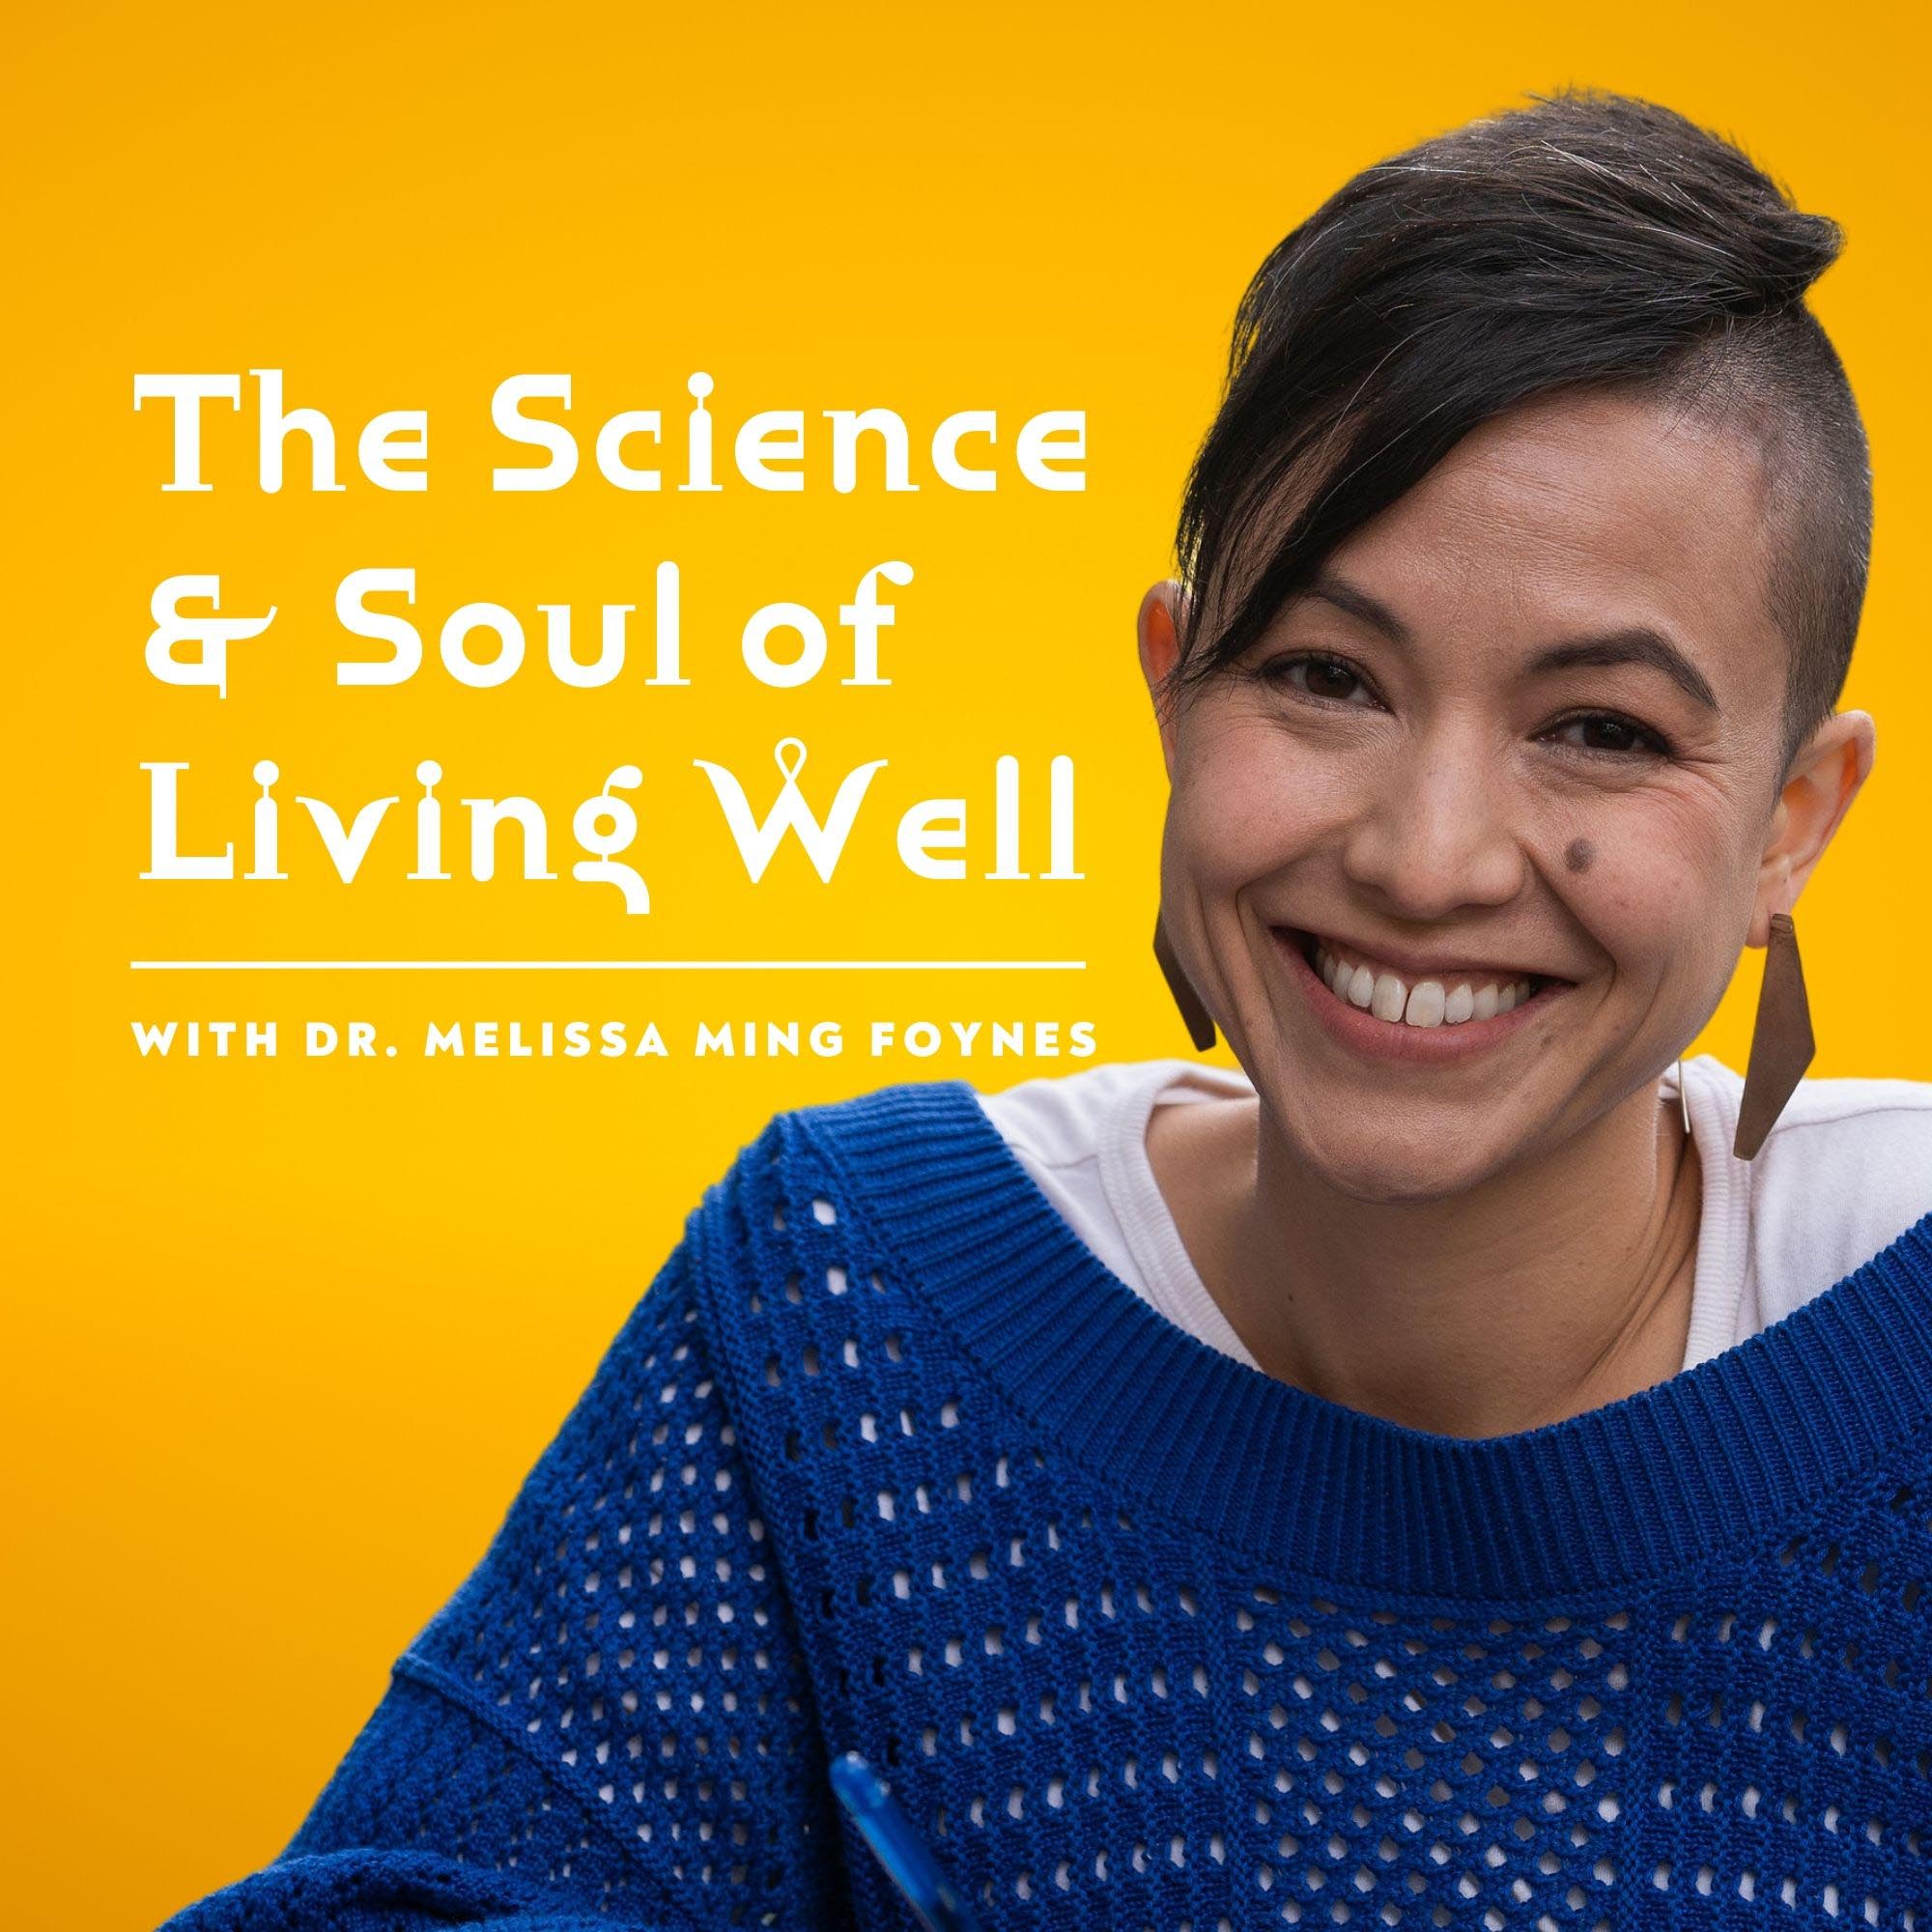 The Science and Soul of Living Well: Betrayal, betrayal trauma, & DARVO: Promoting individual & collective healing